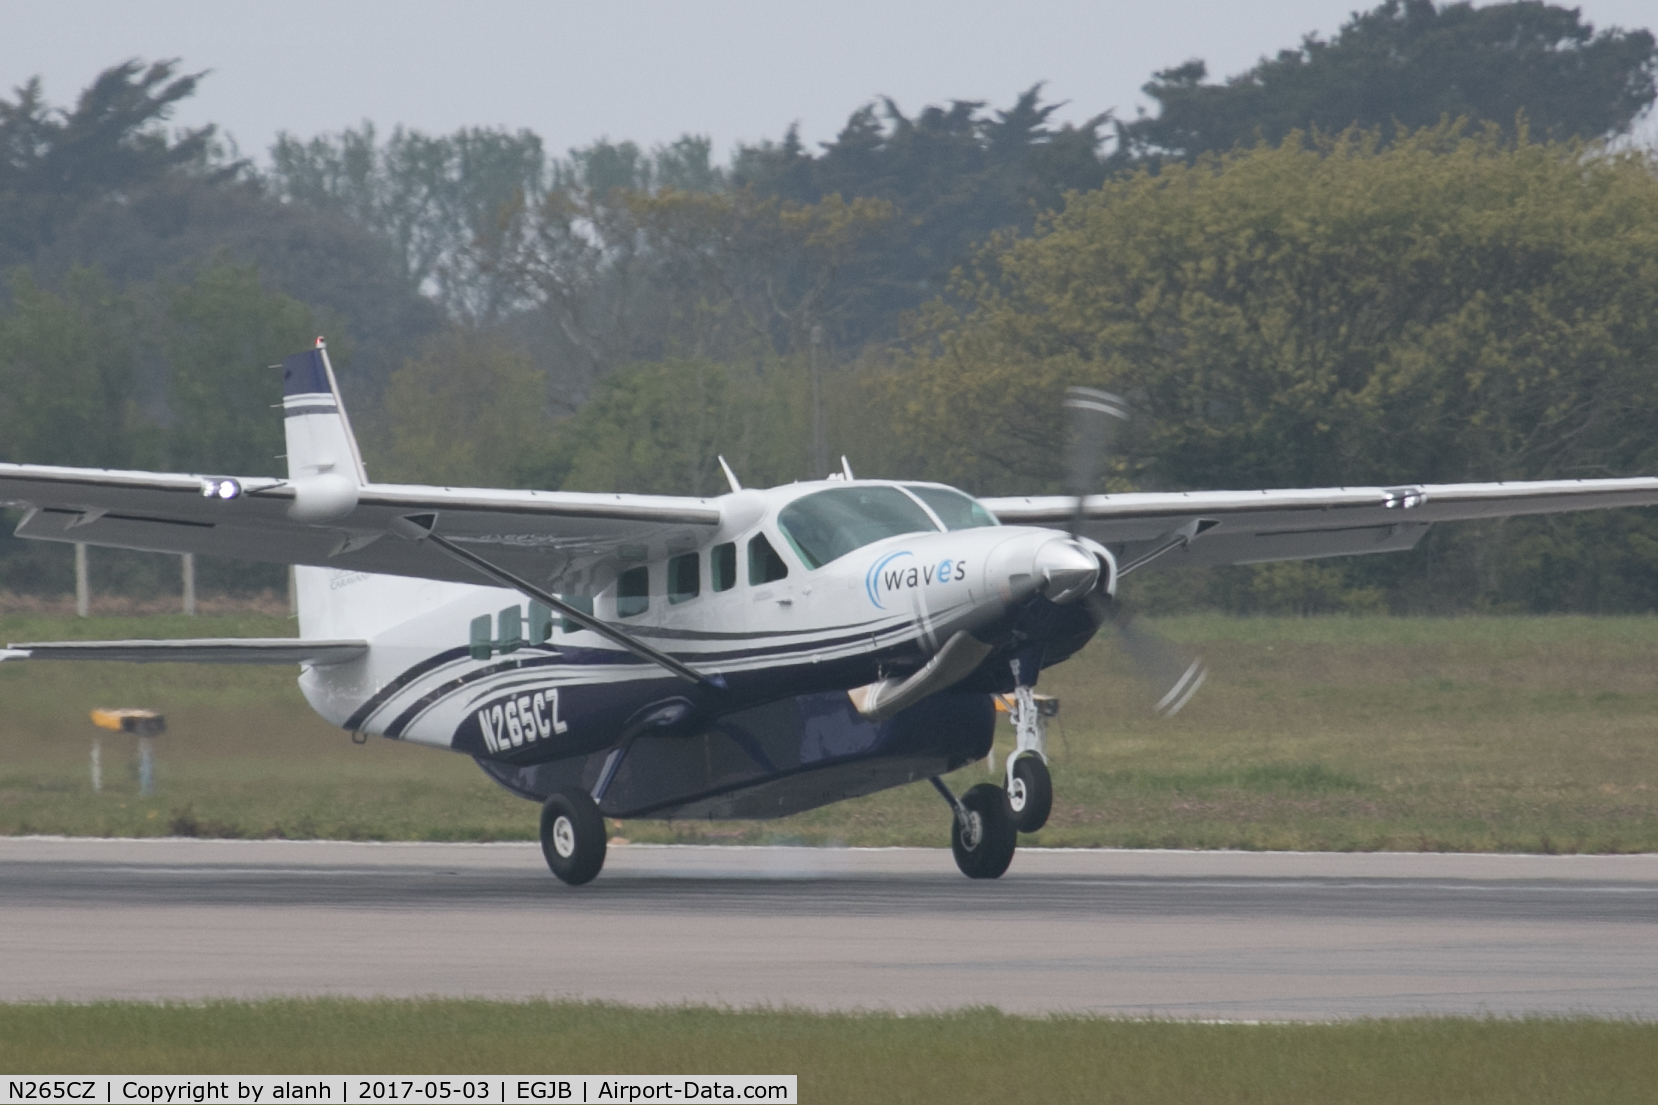 N265CZ, 2016 Cessna 208B  Grand Caravan C/N 208B5265, Landing at Guernsey, demo for projected new Waves air taxi service